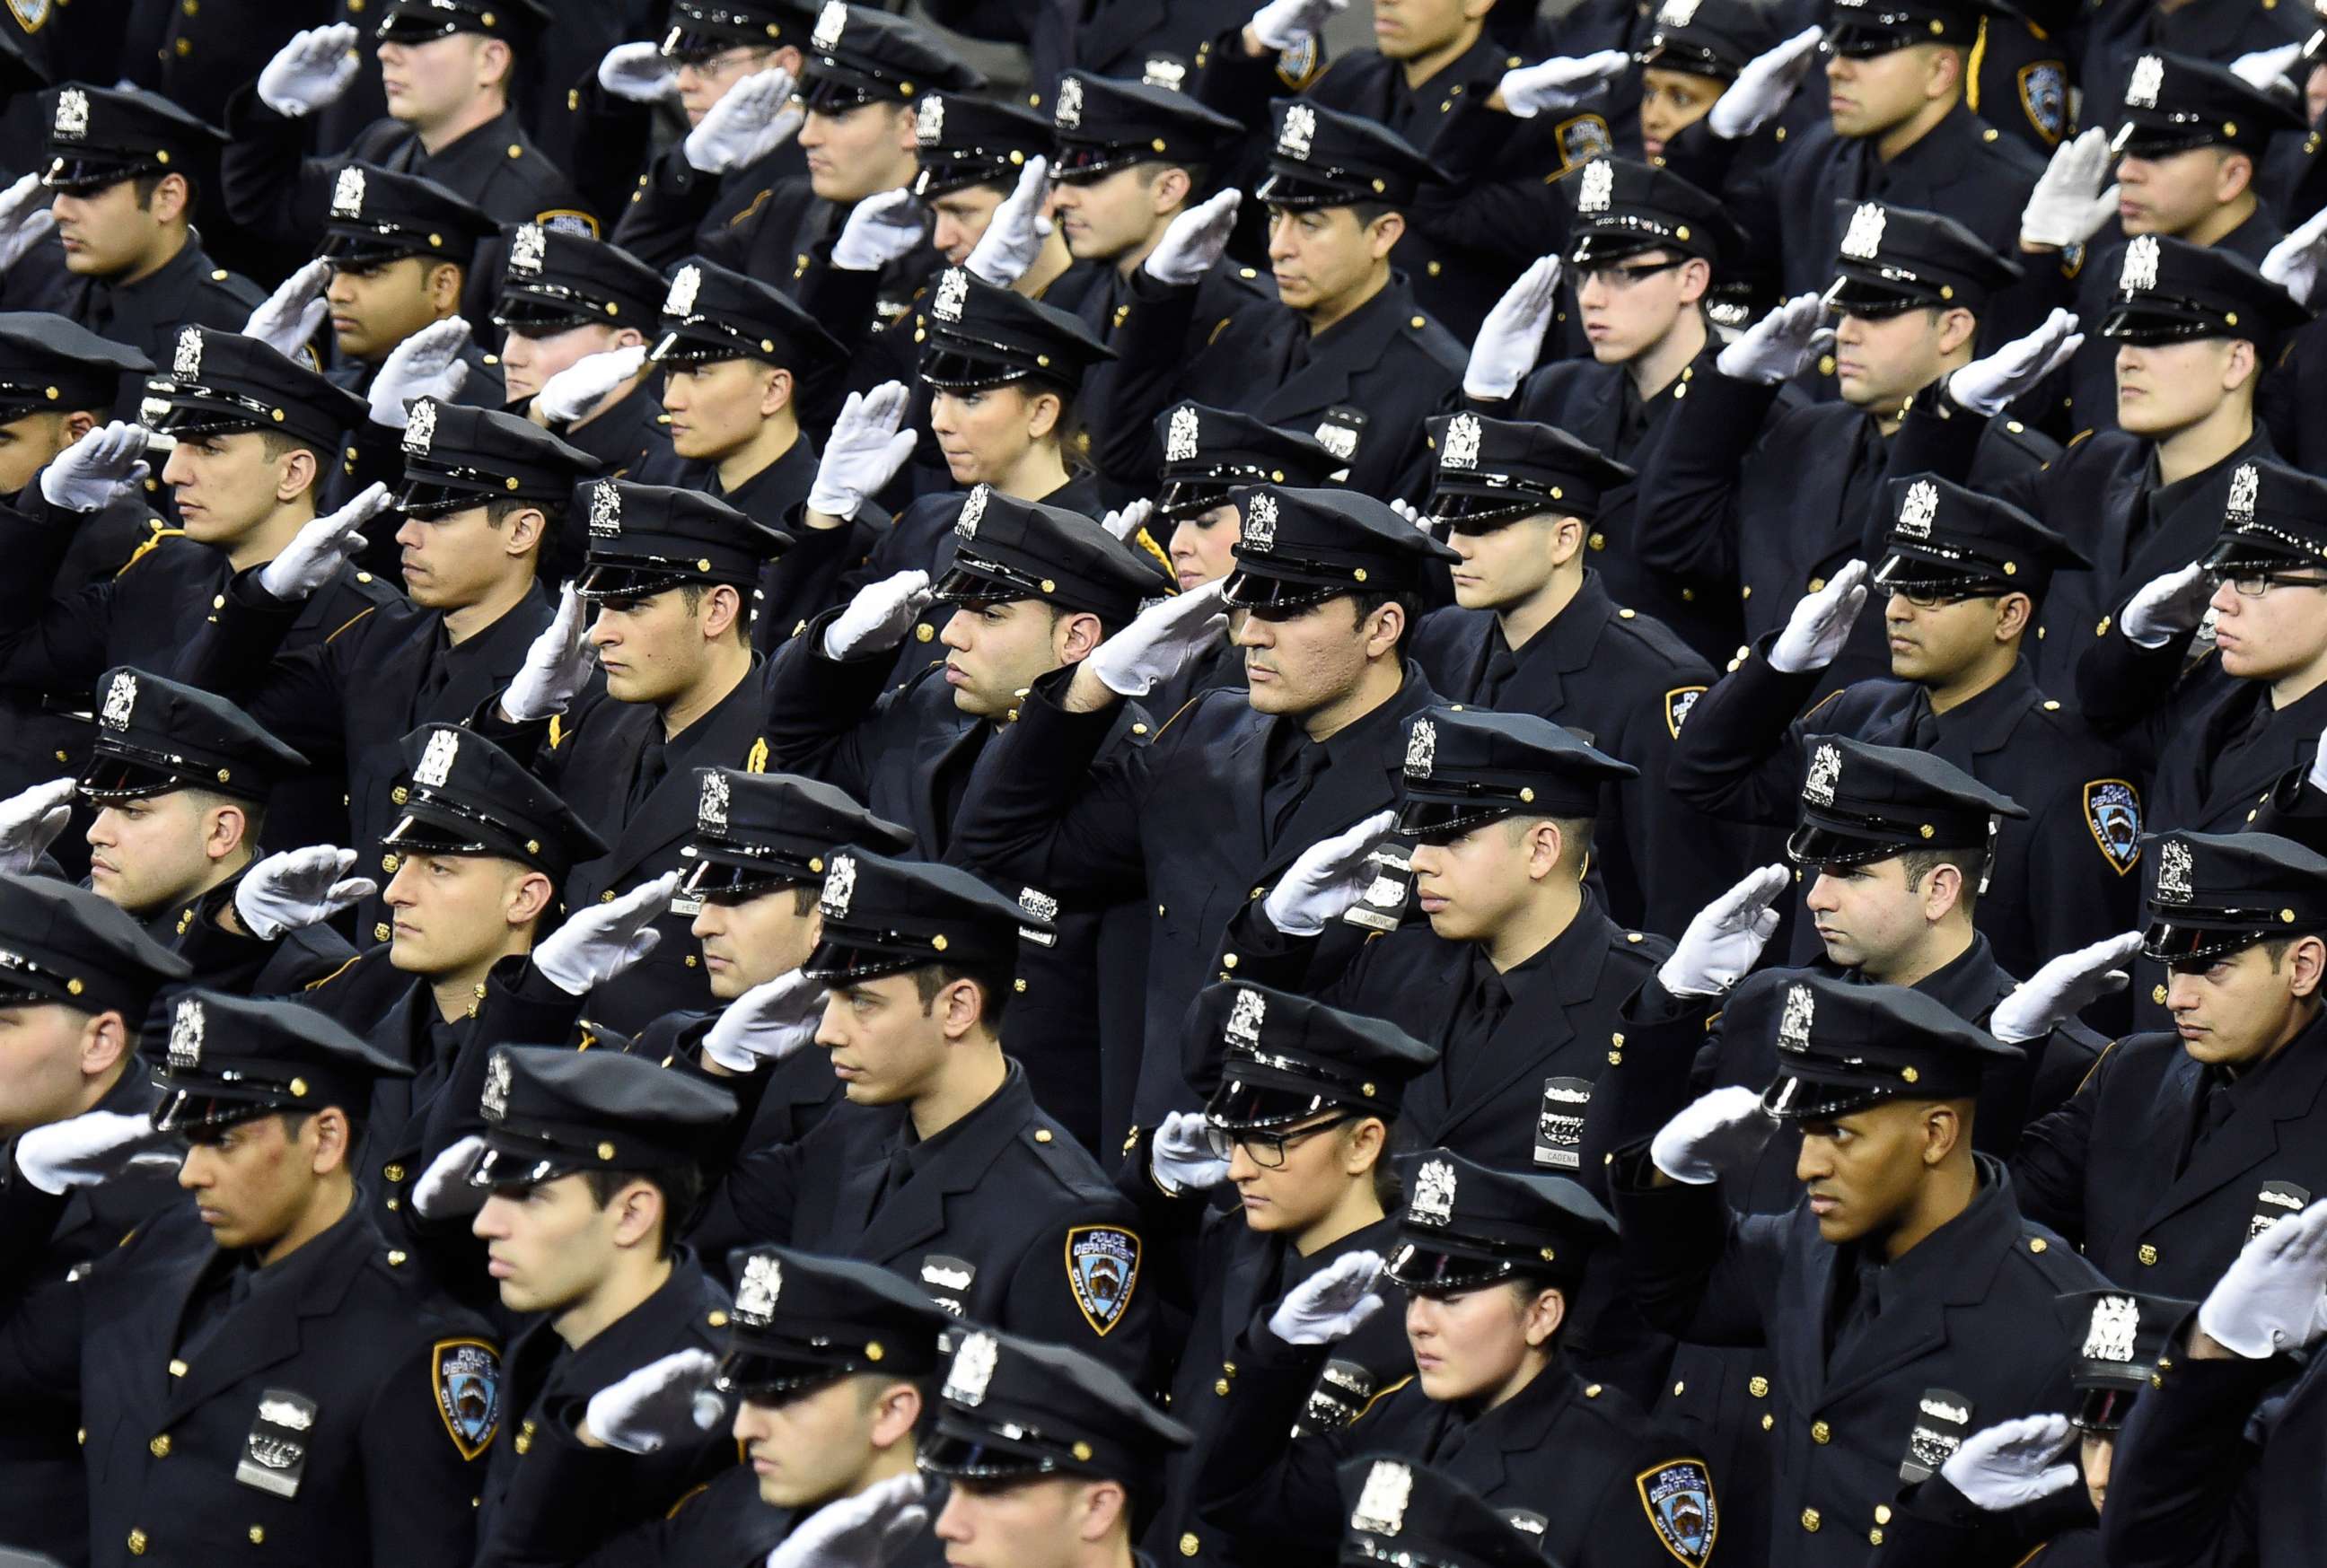 PHOTO: Cadets salute during the New York Police Department graduation ceremony at Madison Square Garden on Dec. 29, 2014, in New York.